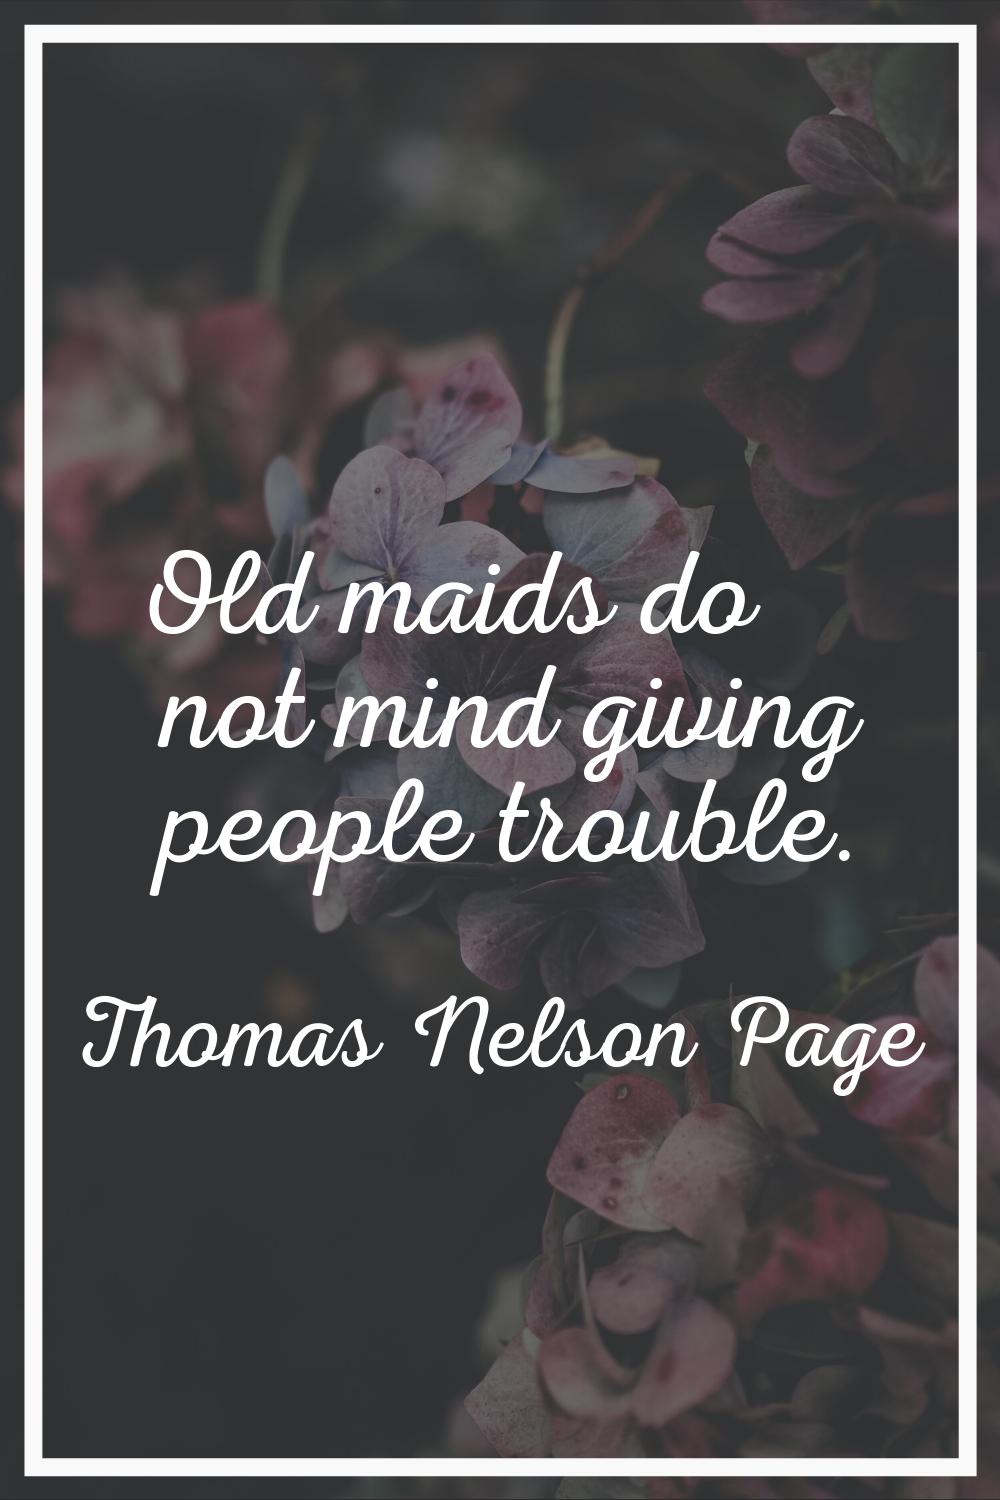 Old maids do not mind giving people trouble.